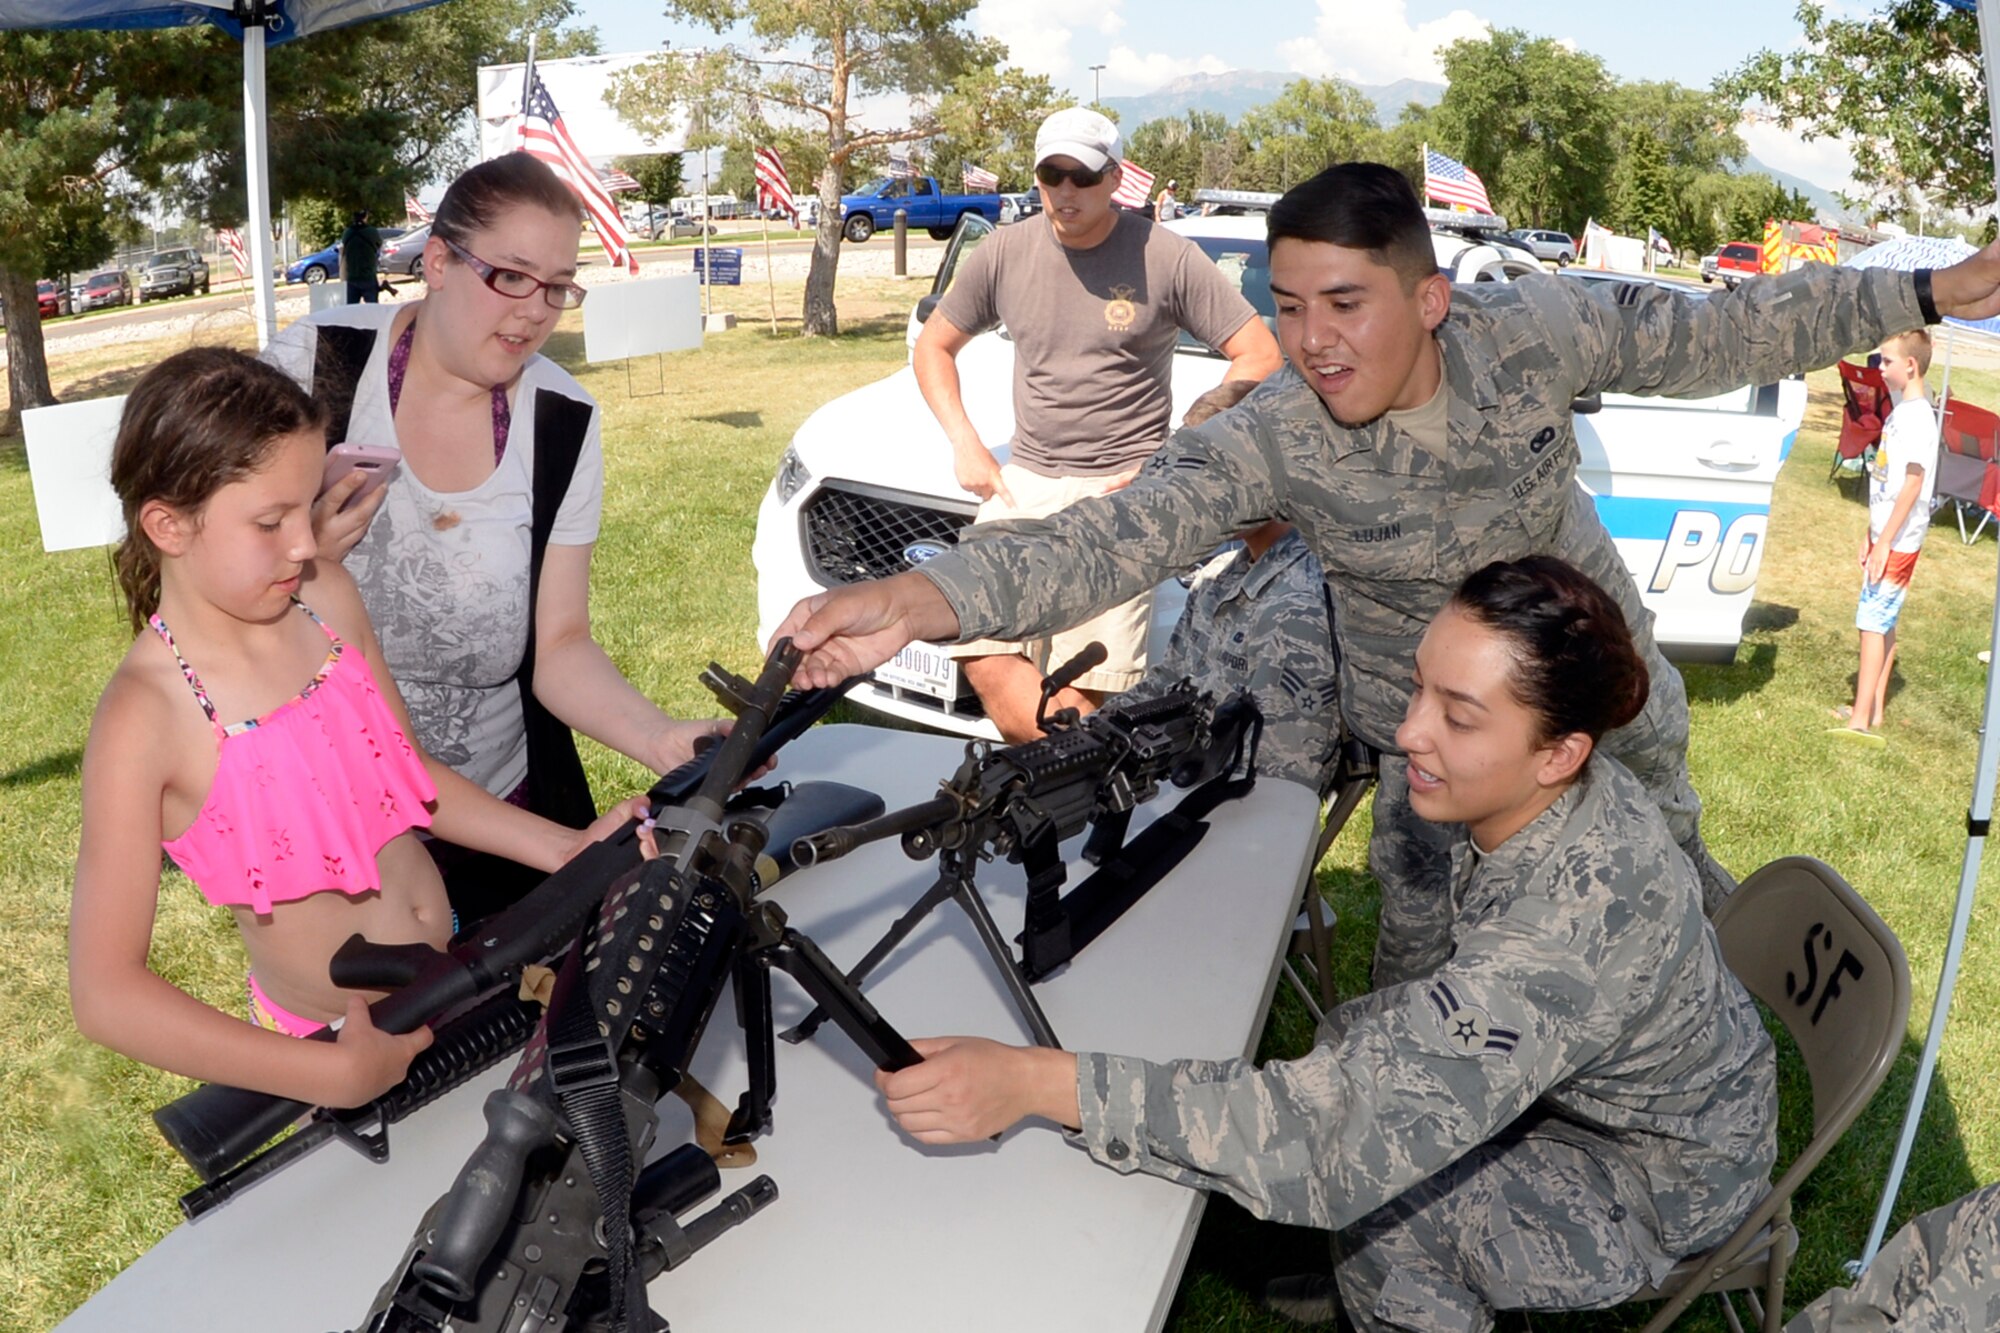 Airman 1st Class Elizabeth Tostado-paz and Airman 1st Class Andrew Lujan, both with 75th Security Forces Squadron, give visitors a chance to handle weapons during the annual Salute Picnic, July 14 at Centennial Park. The event pulled dozens of community sponsors together to provide a day of food and fun for military members and families, and showed appreciation to those who serve. (Air Force photo/Todd Cromar)